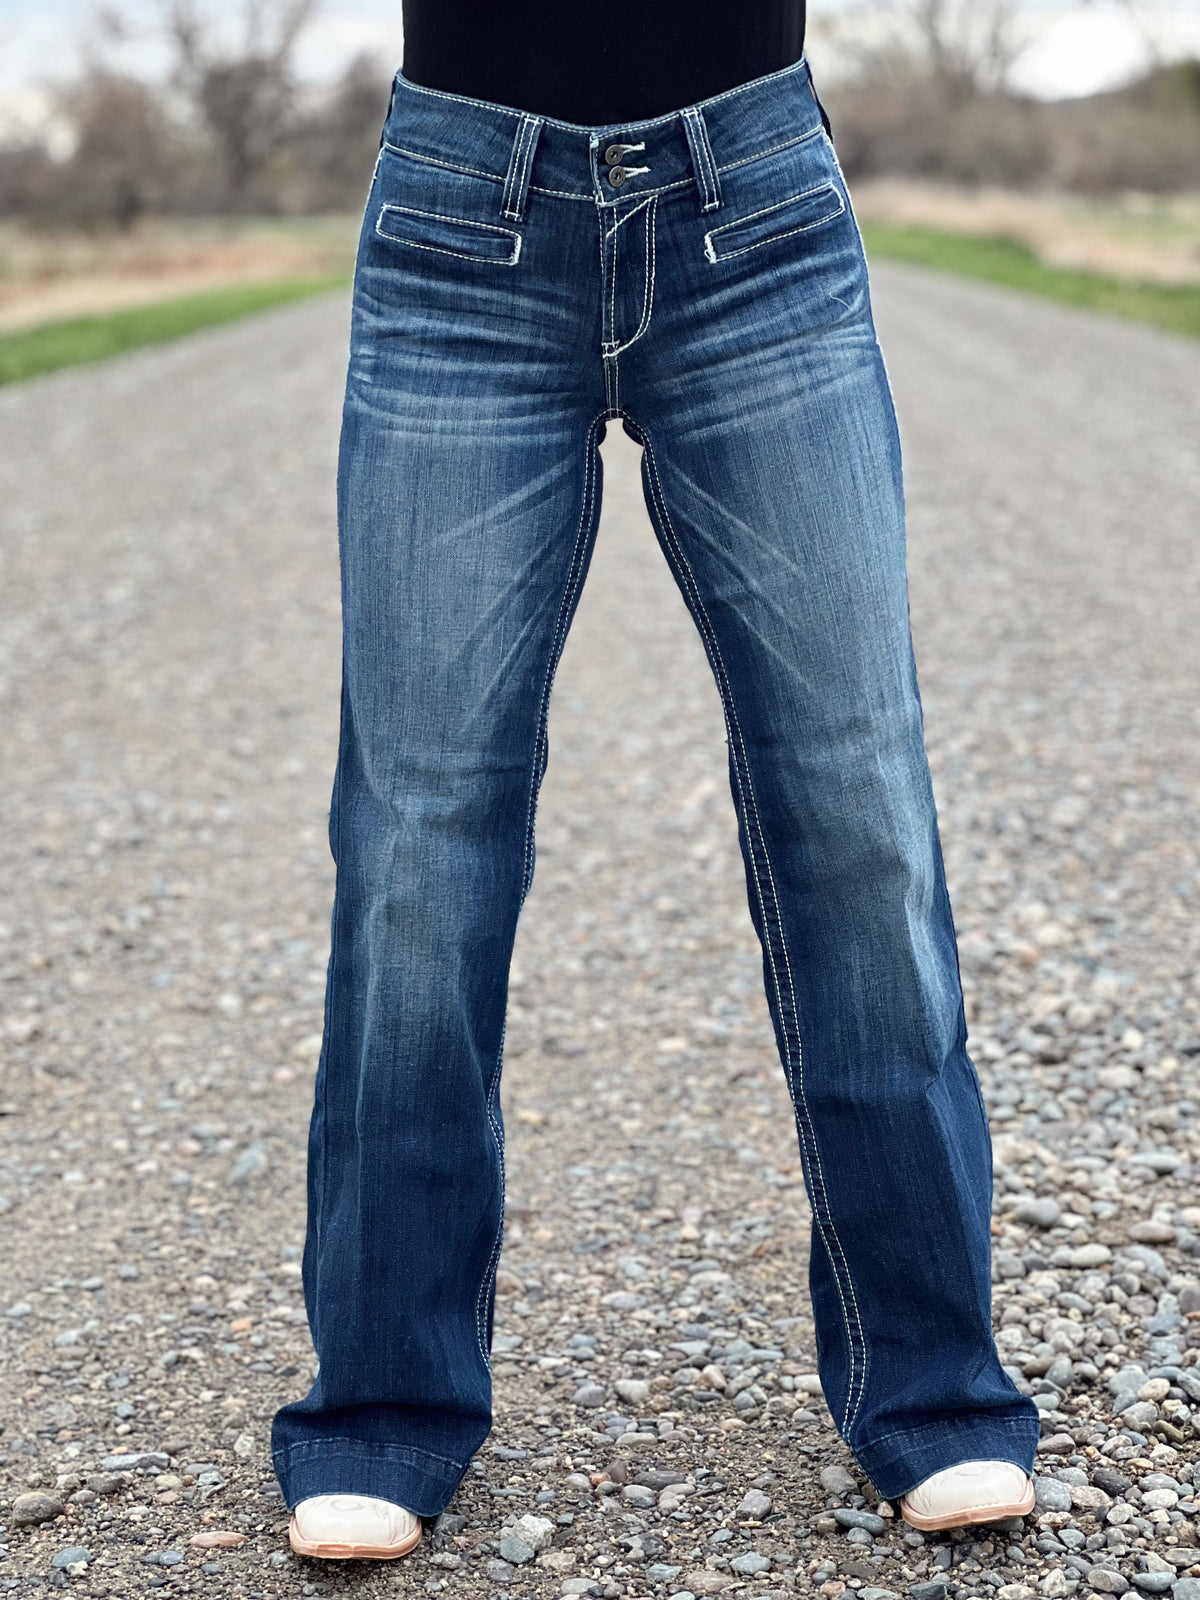 The Entwined Mid Rise Jean